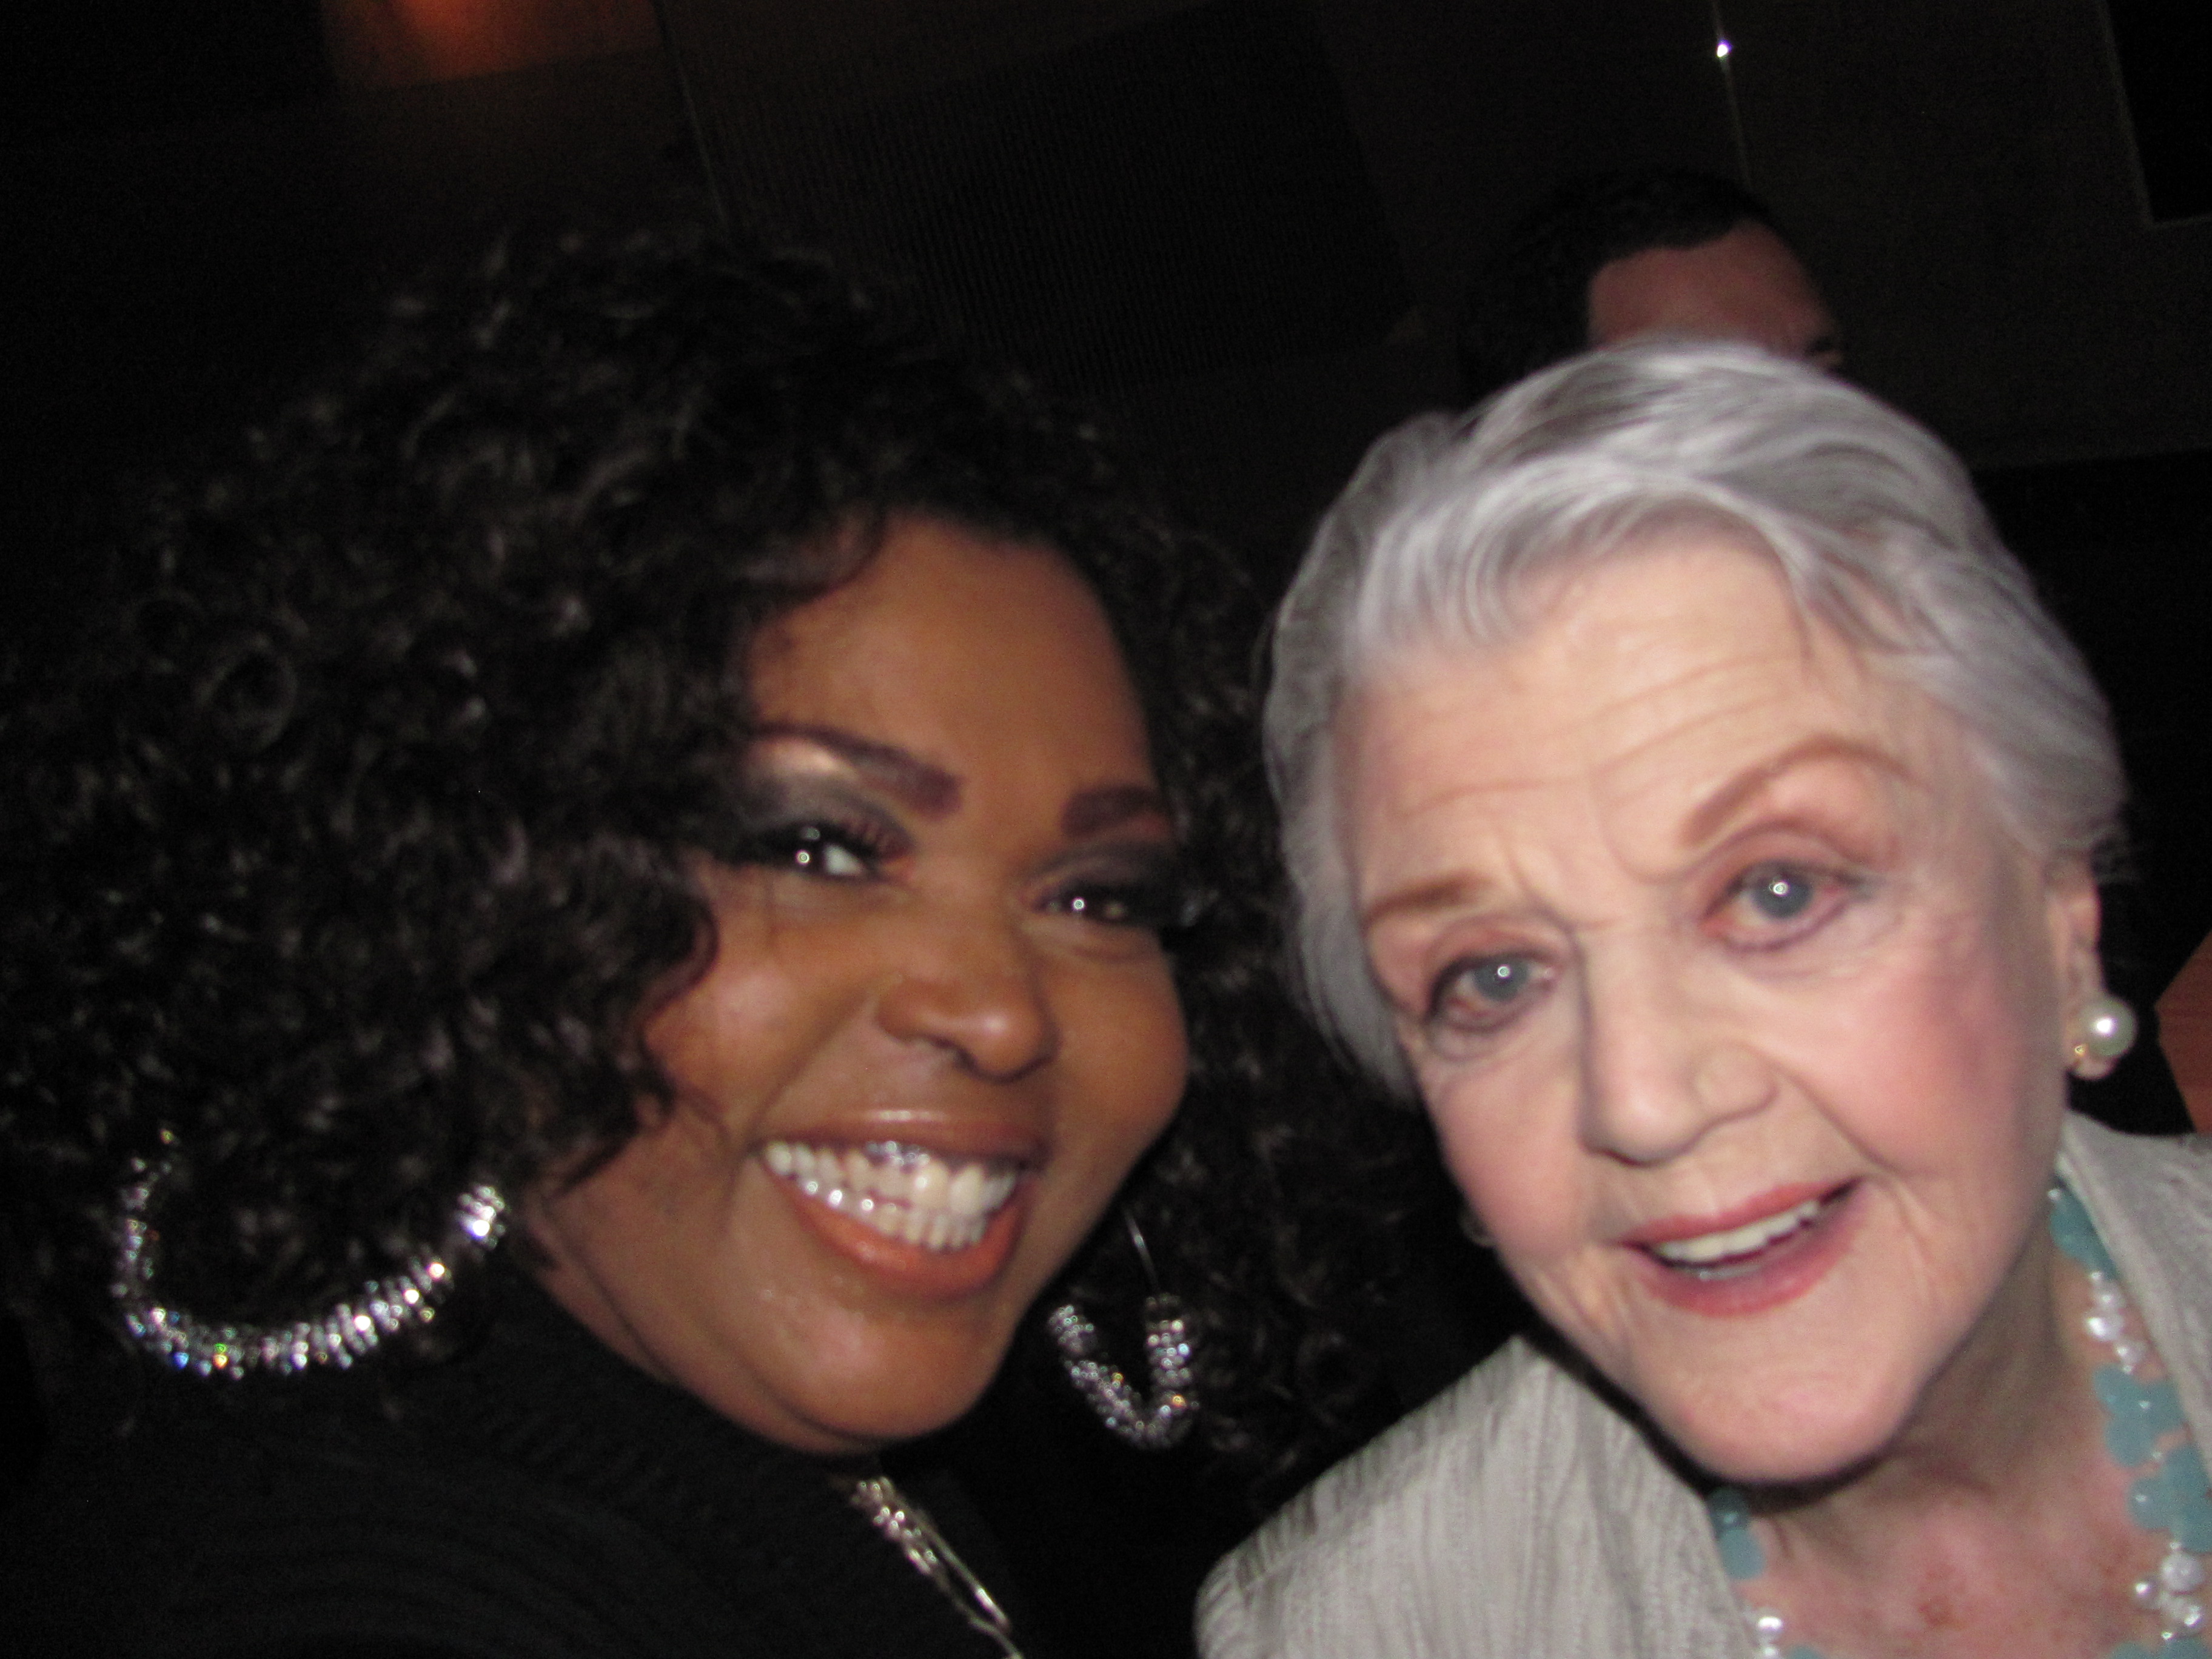 Liz and Angela Lansbury at Opening night of the 2012 revival of Gore Vidals The Best Man.